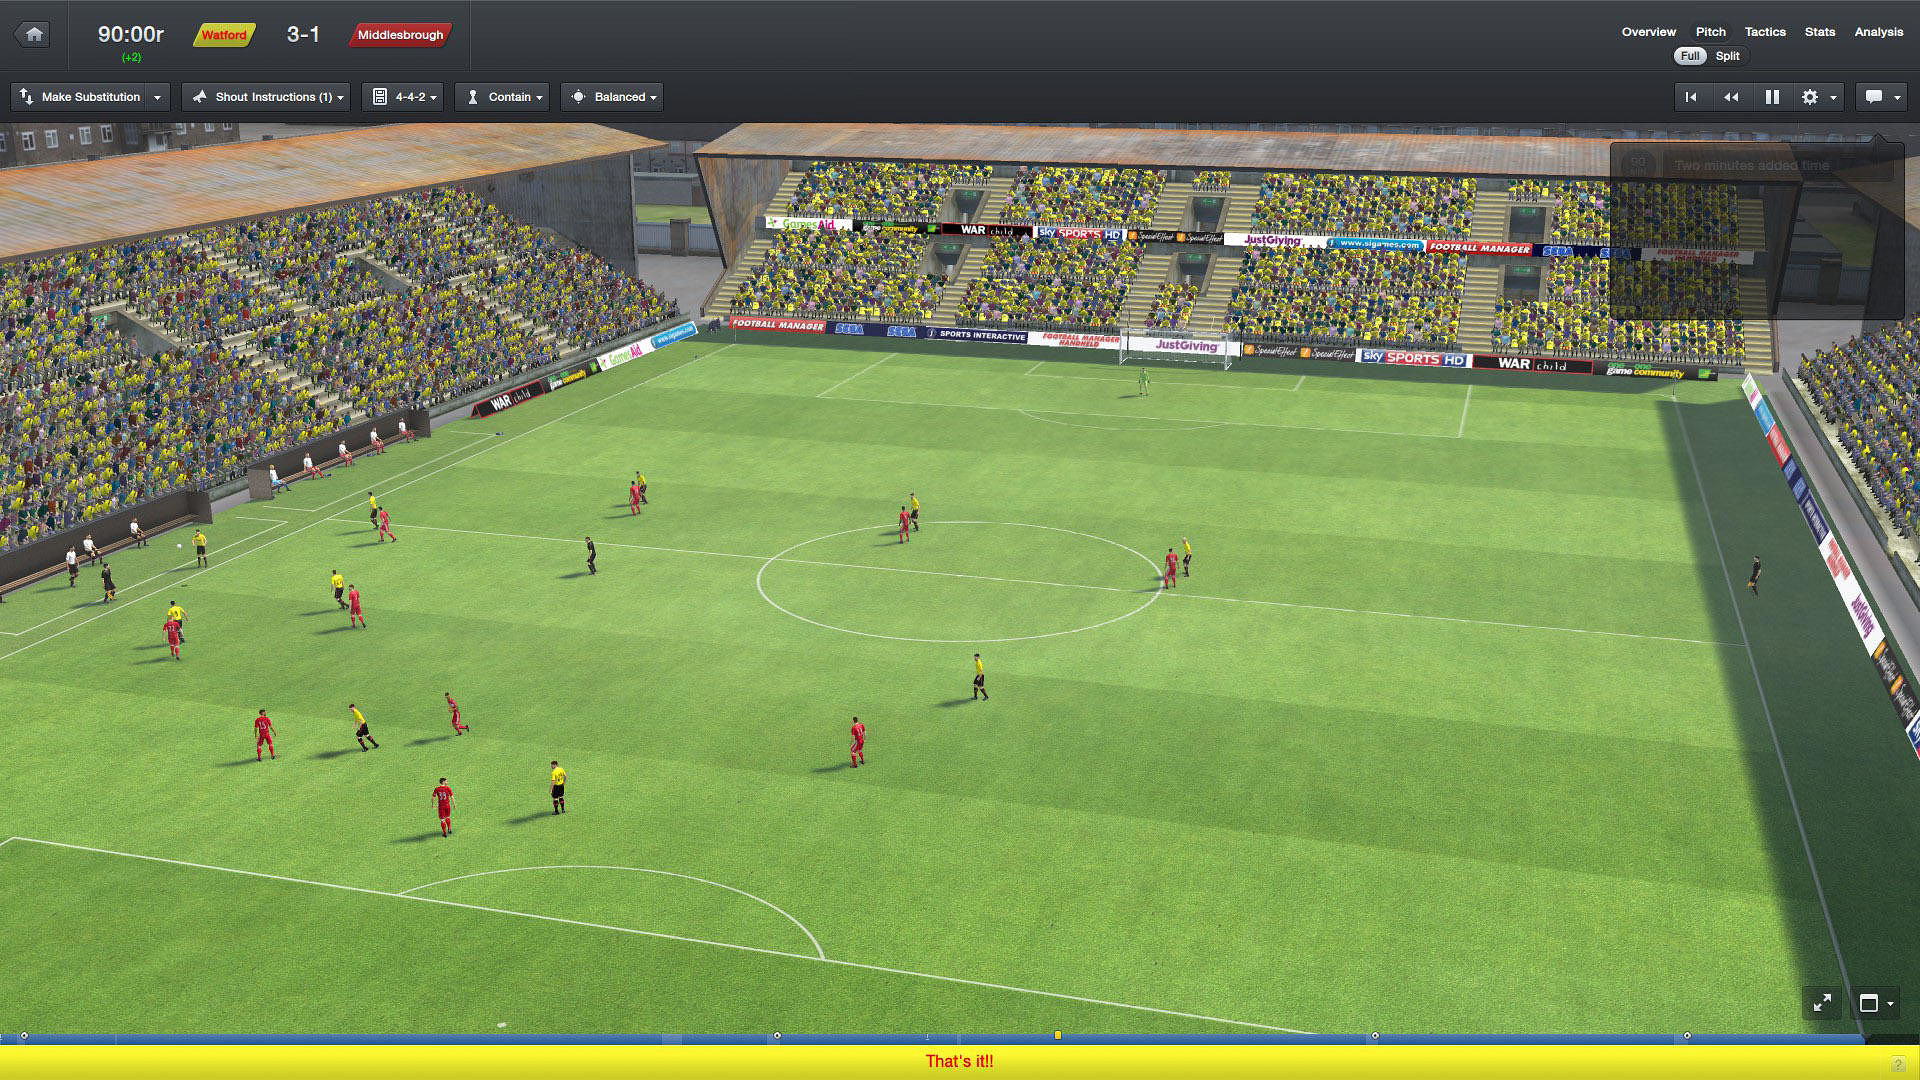 Football Manager 2016 on the pitch